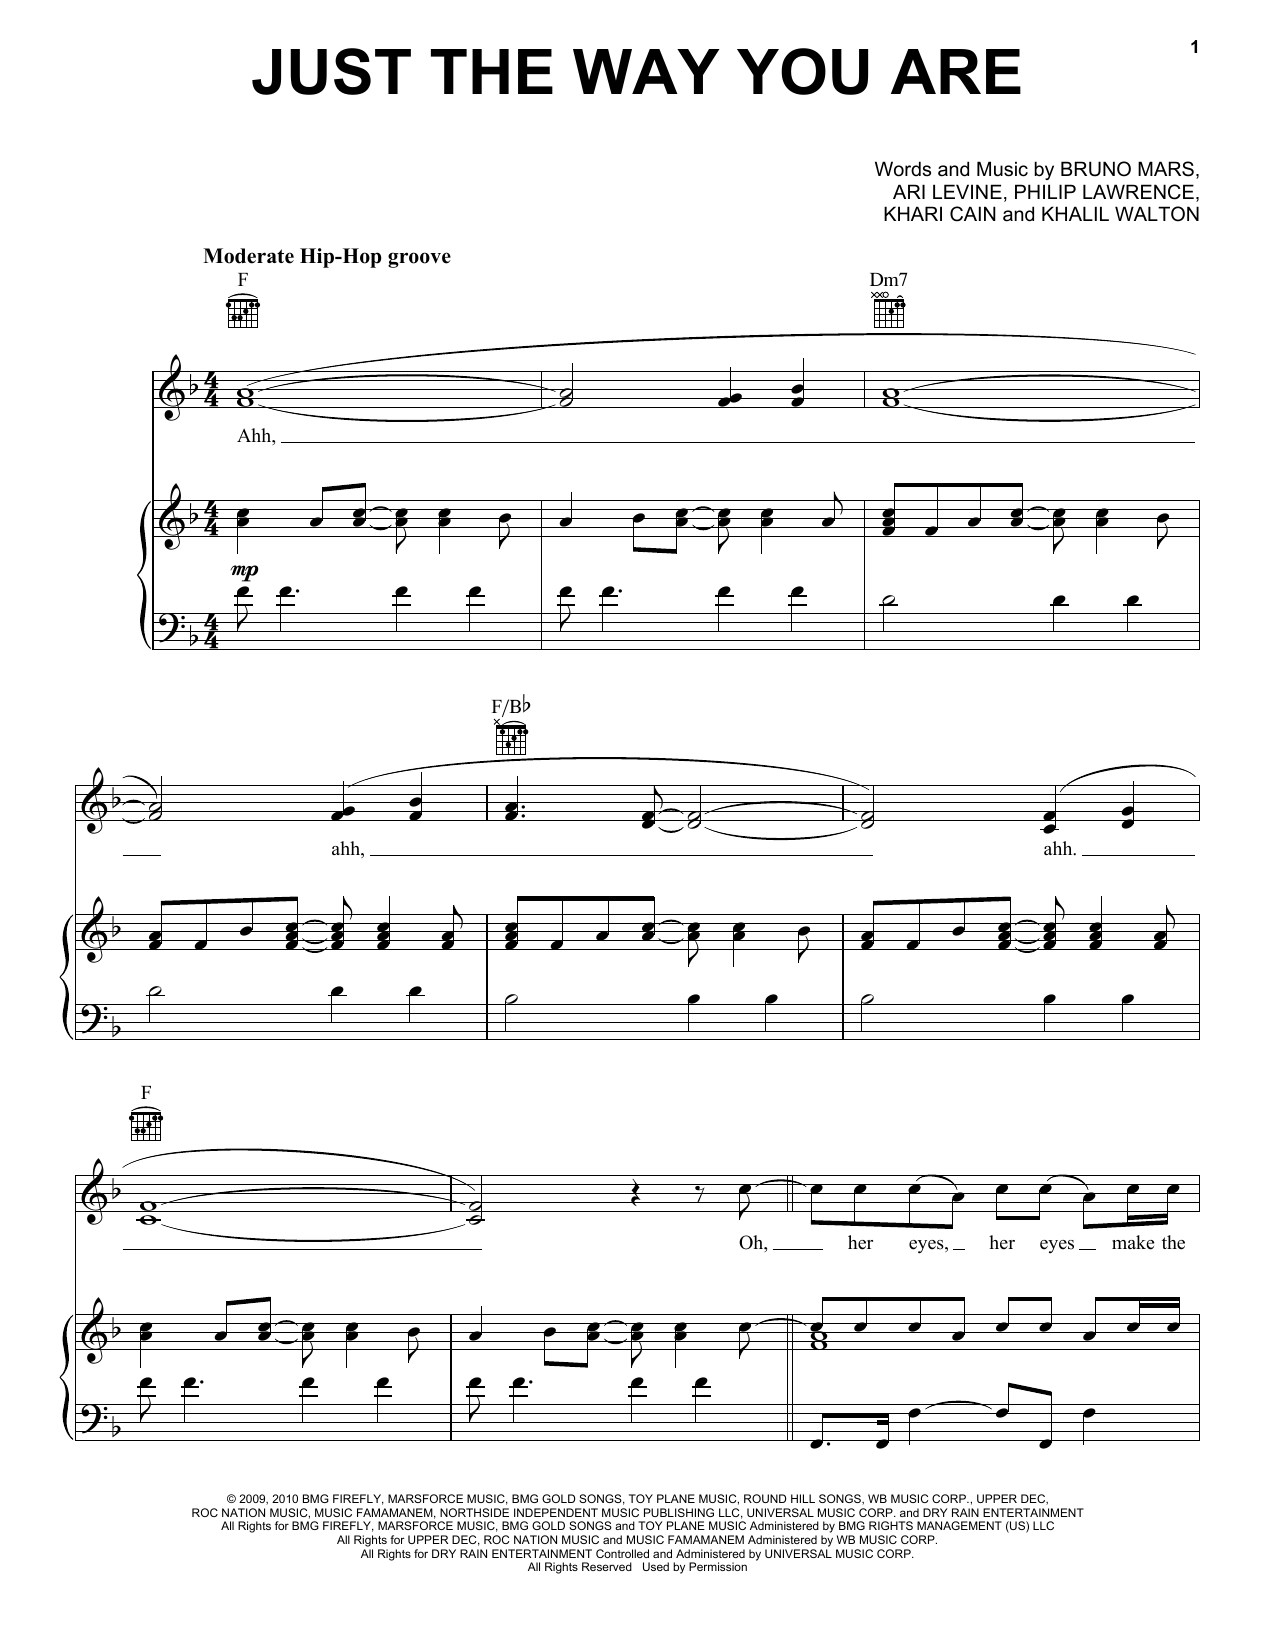 Bruno Mars Just The Way You Are sheet music notes and chords. Download Printable PDF.